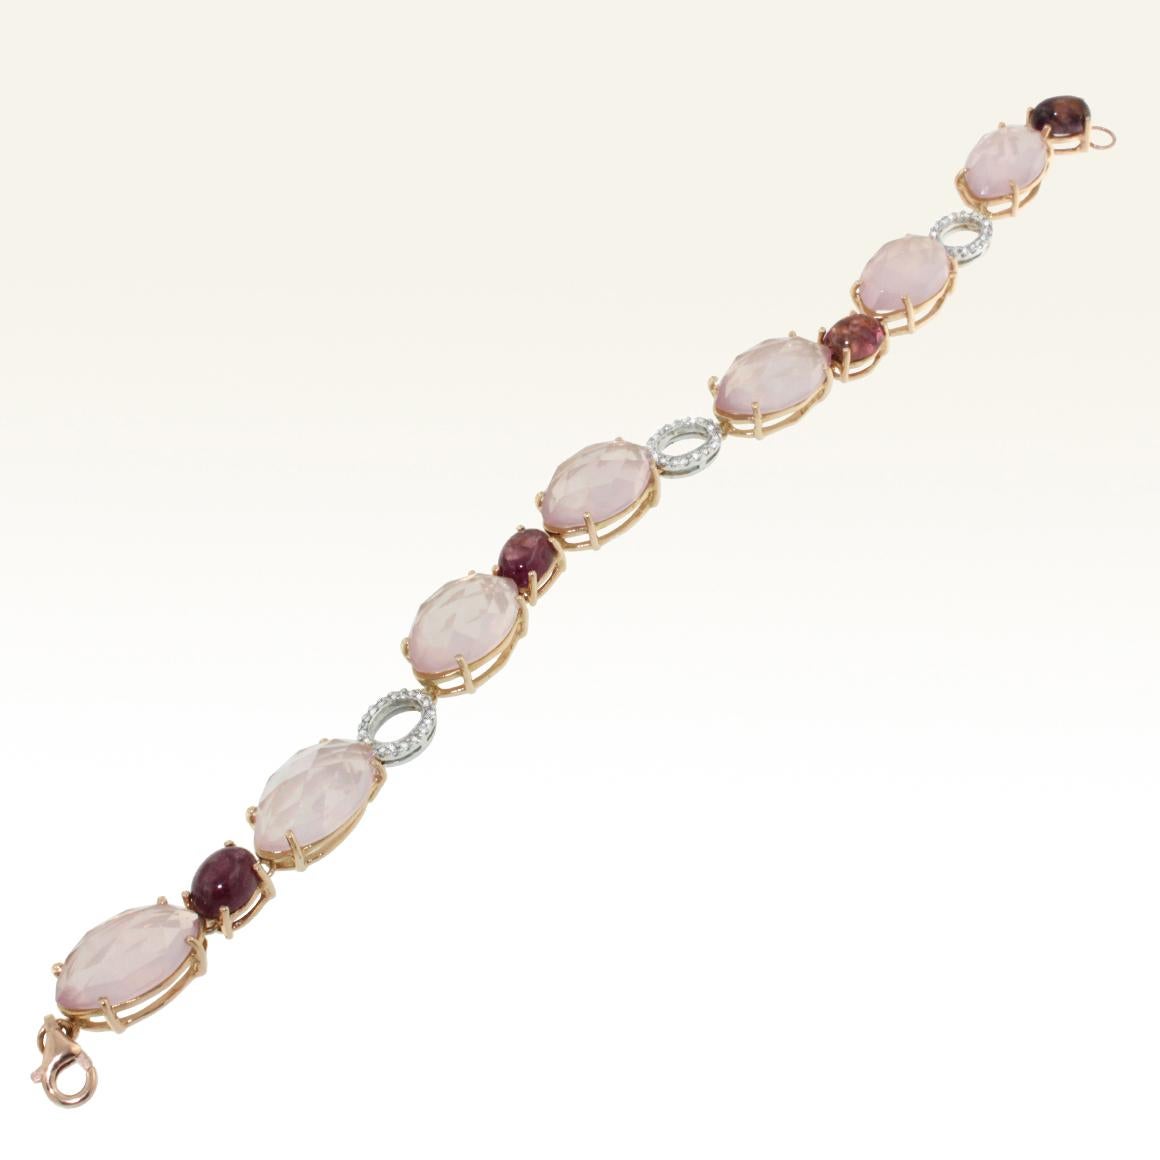 Very pretty bracelet with delicate colored stones. Natural stones with white diamonds . Craftsmanship in Italy by Stanoppi Jewellery since 1948.

Bracelet in 18k rose and white gold with Pink Quartz ( marquise cut size: 12x20mm), Pink Tourmaline